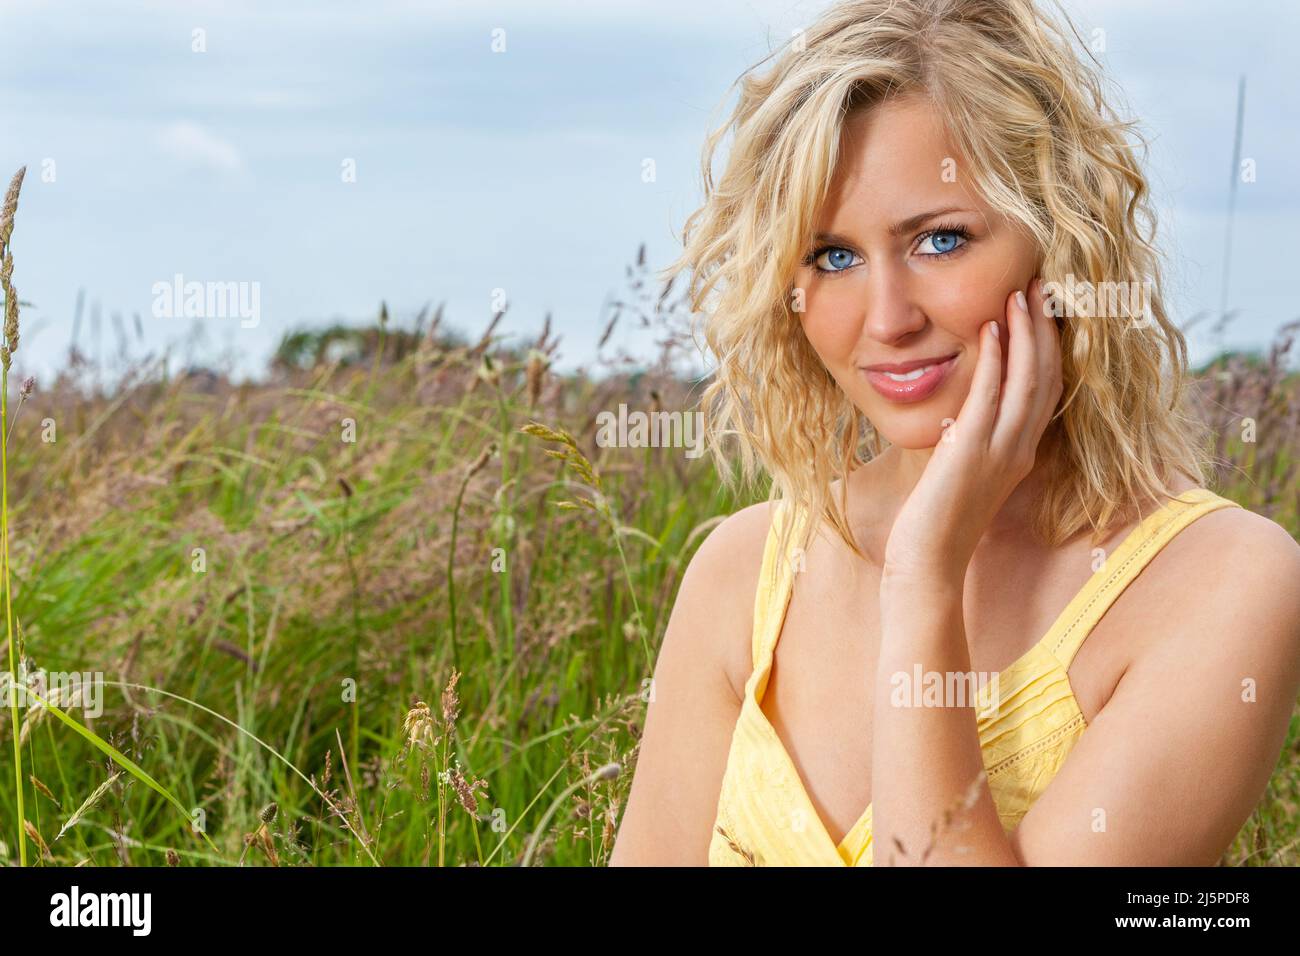 Outdoor smiling happy portrait of smiling and happy, beautiful young female teenager with blonde hair and in a green field Stock Photo